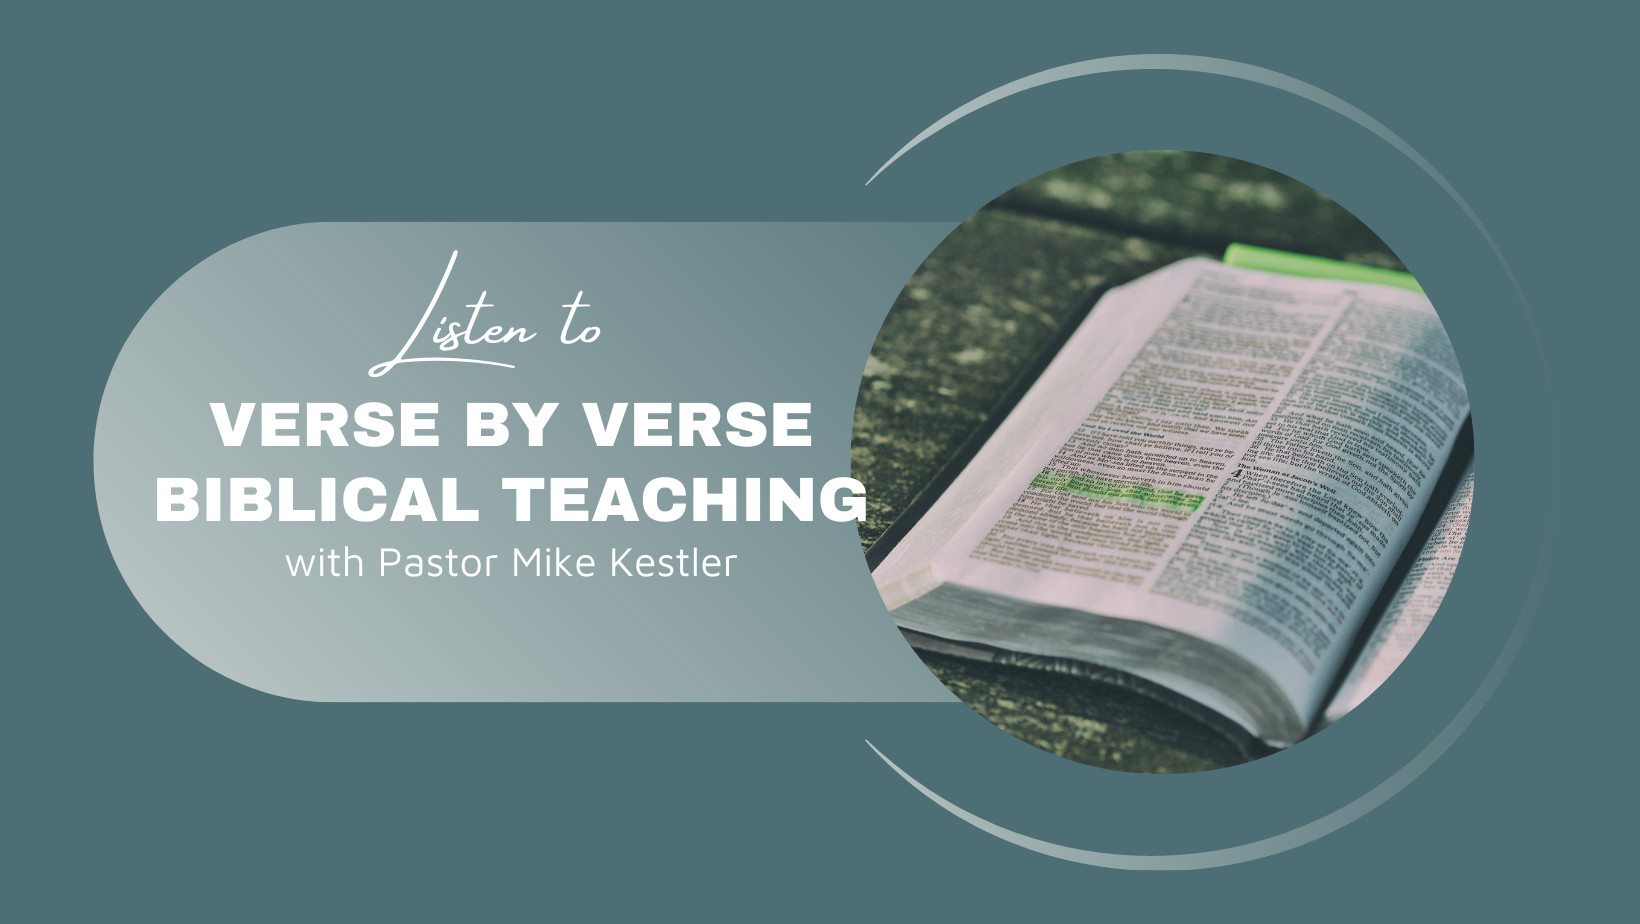 It's Time with Pastor Mike Kestler